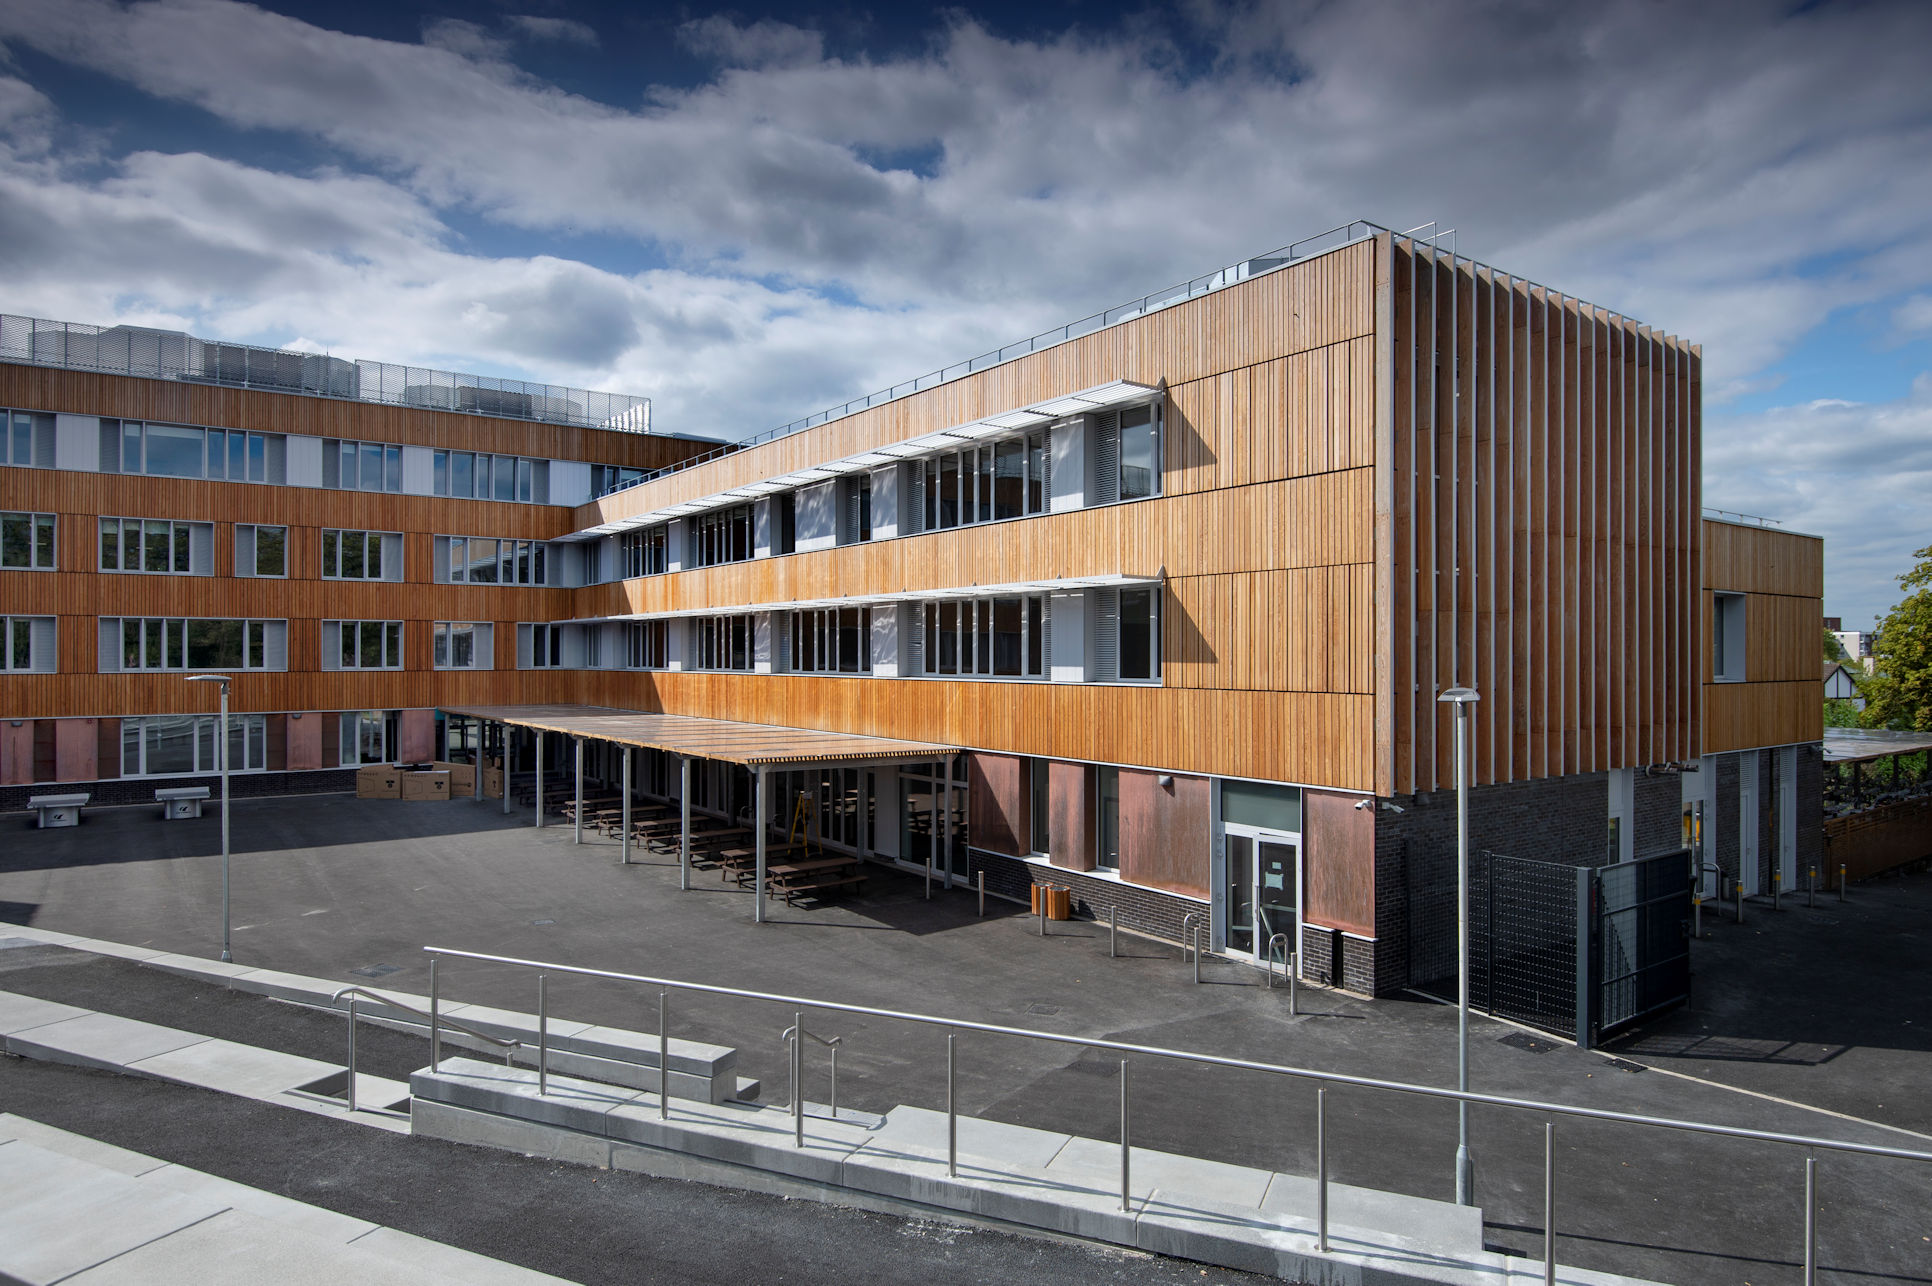 The new Passivhaus Harris Academy in Sutton, south London